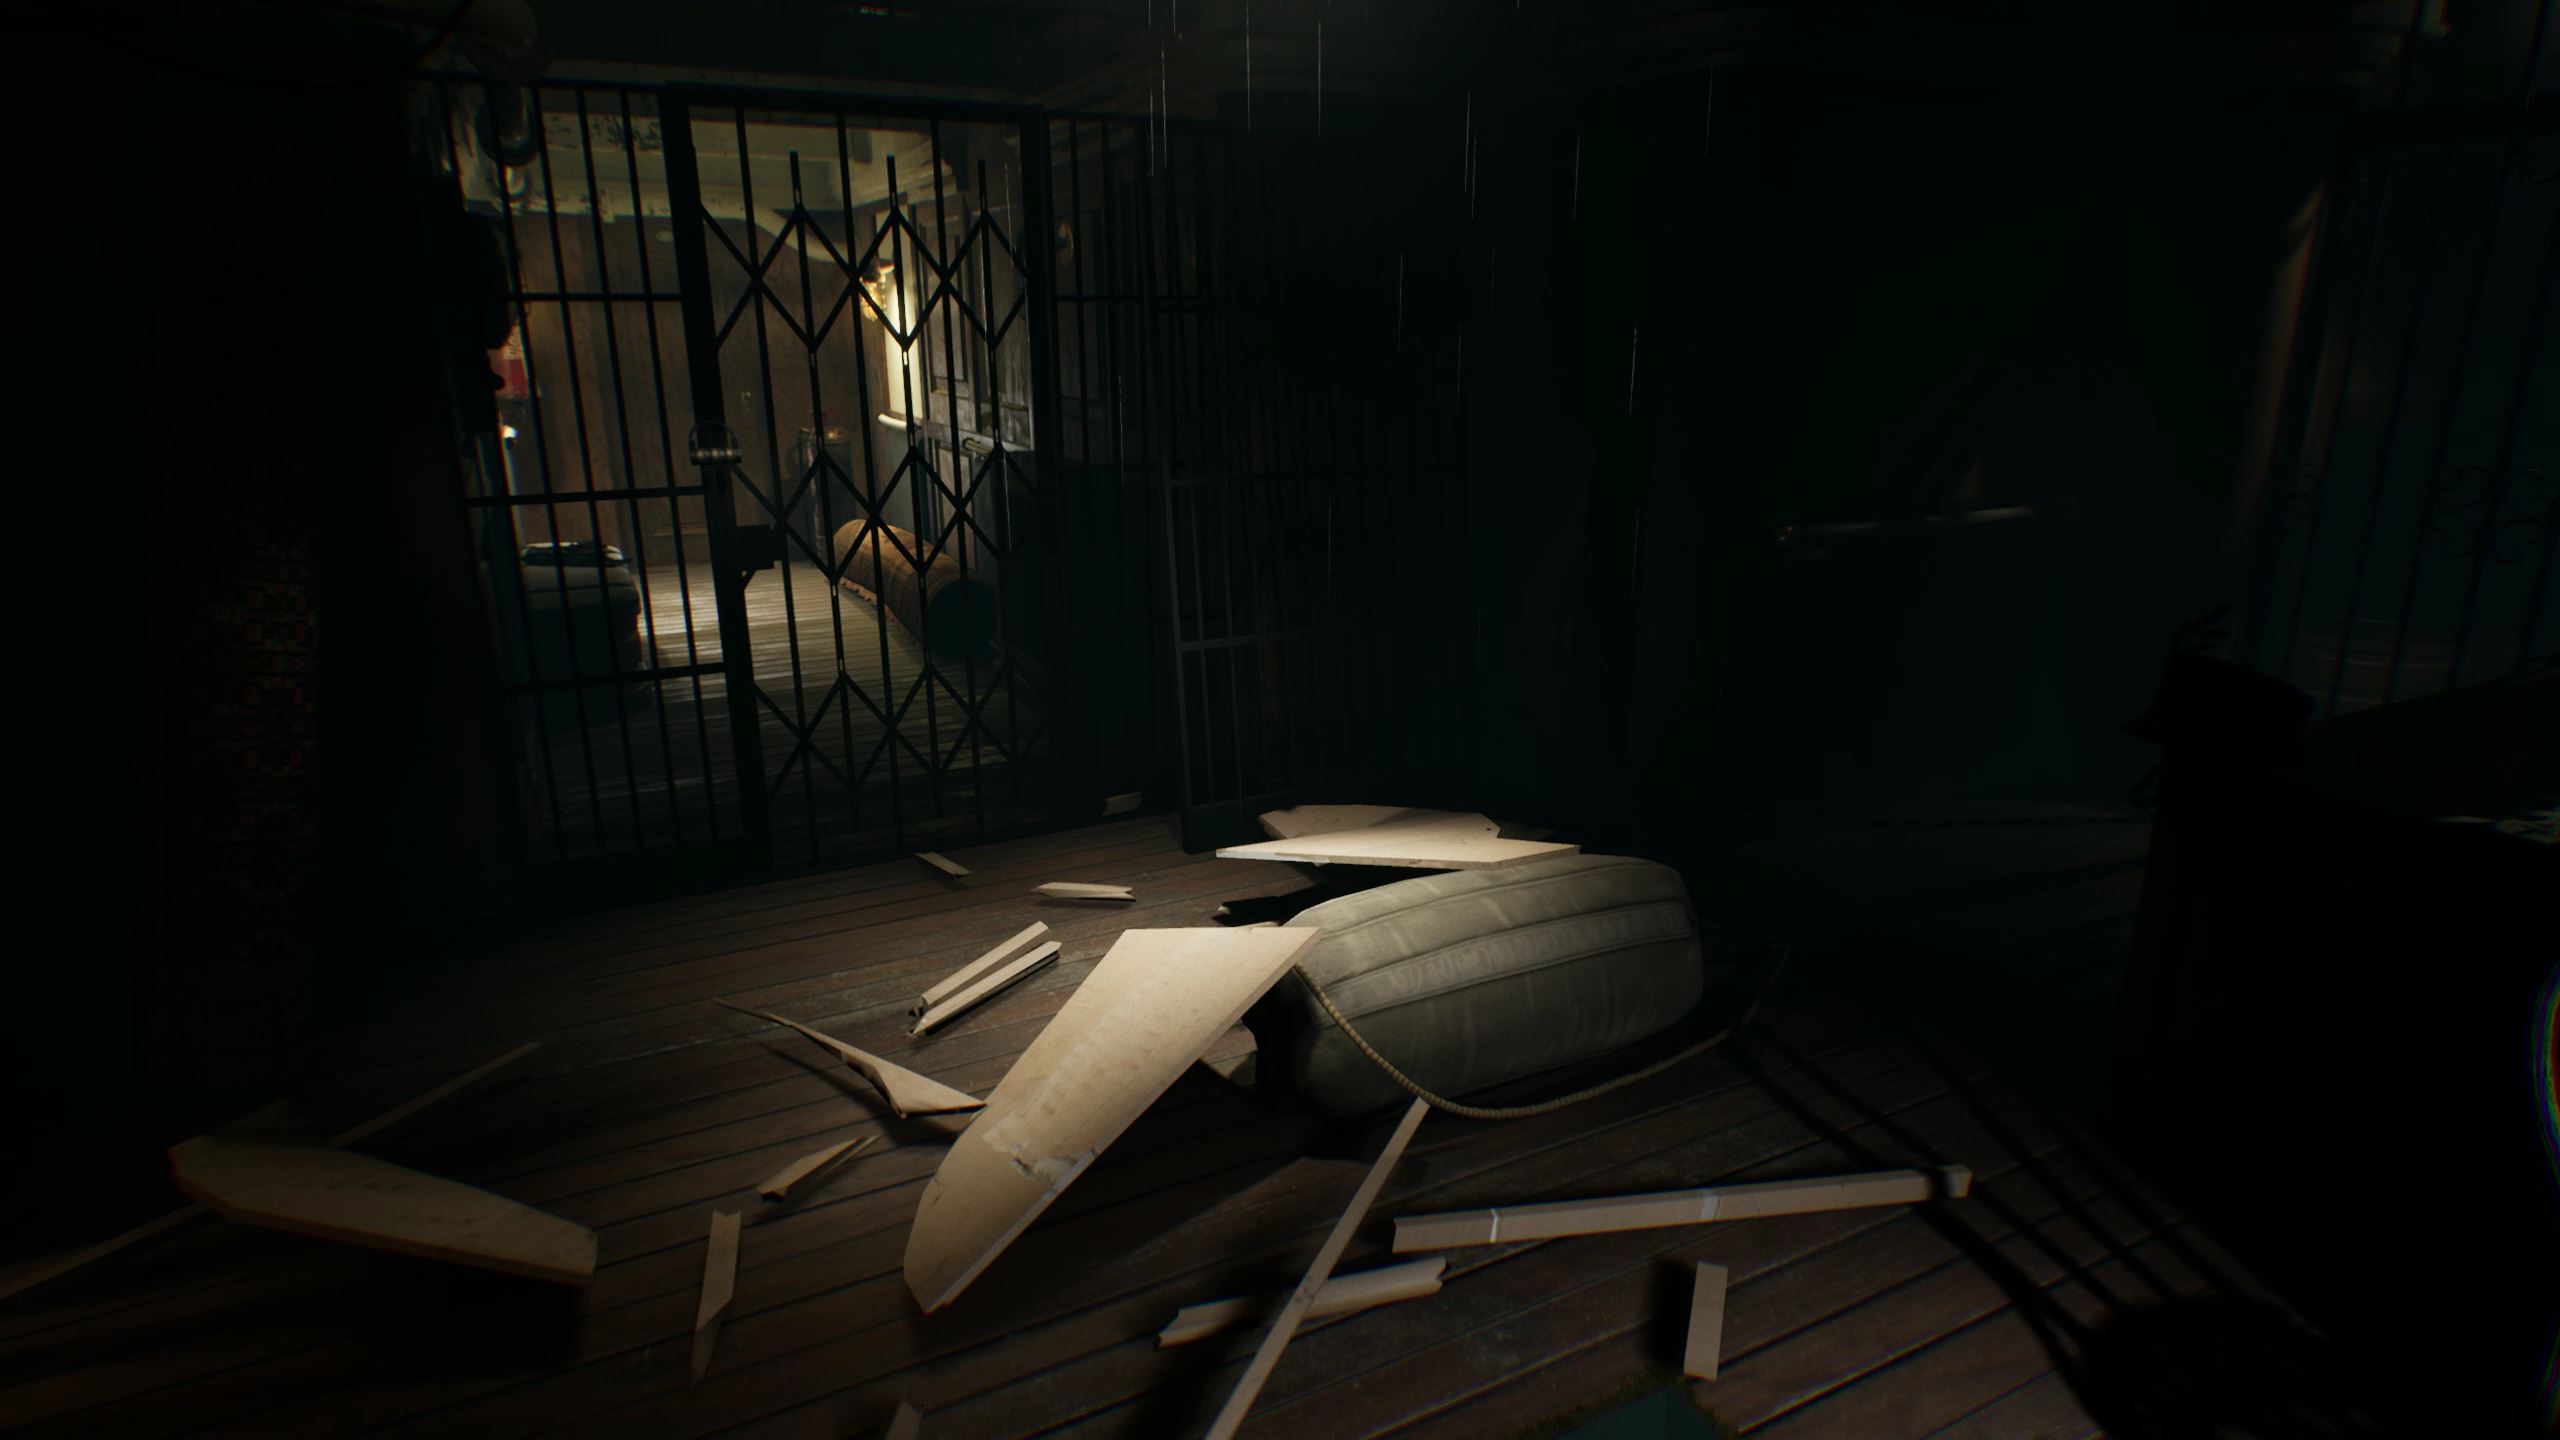 Layers of Fear 2 – Time Waits for No One 